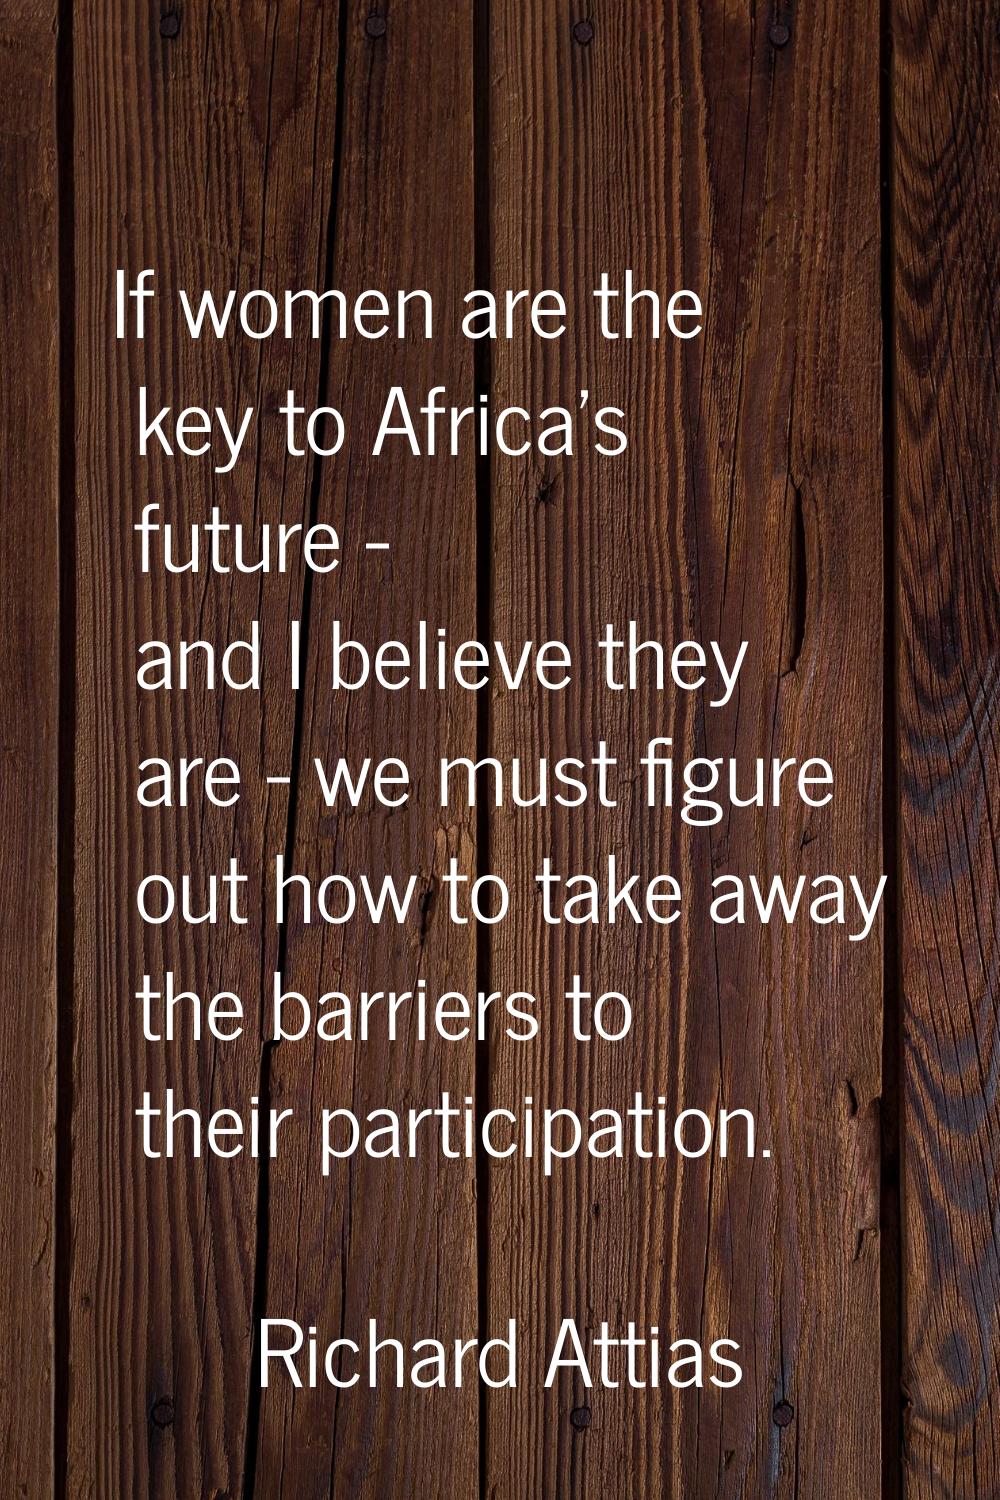 If women are the key to Africa's future - and I believe they are - we must figure out how to take a